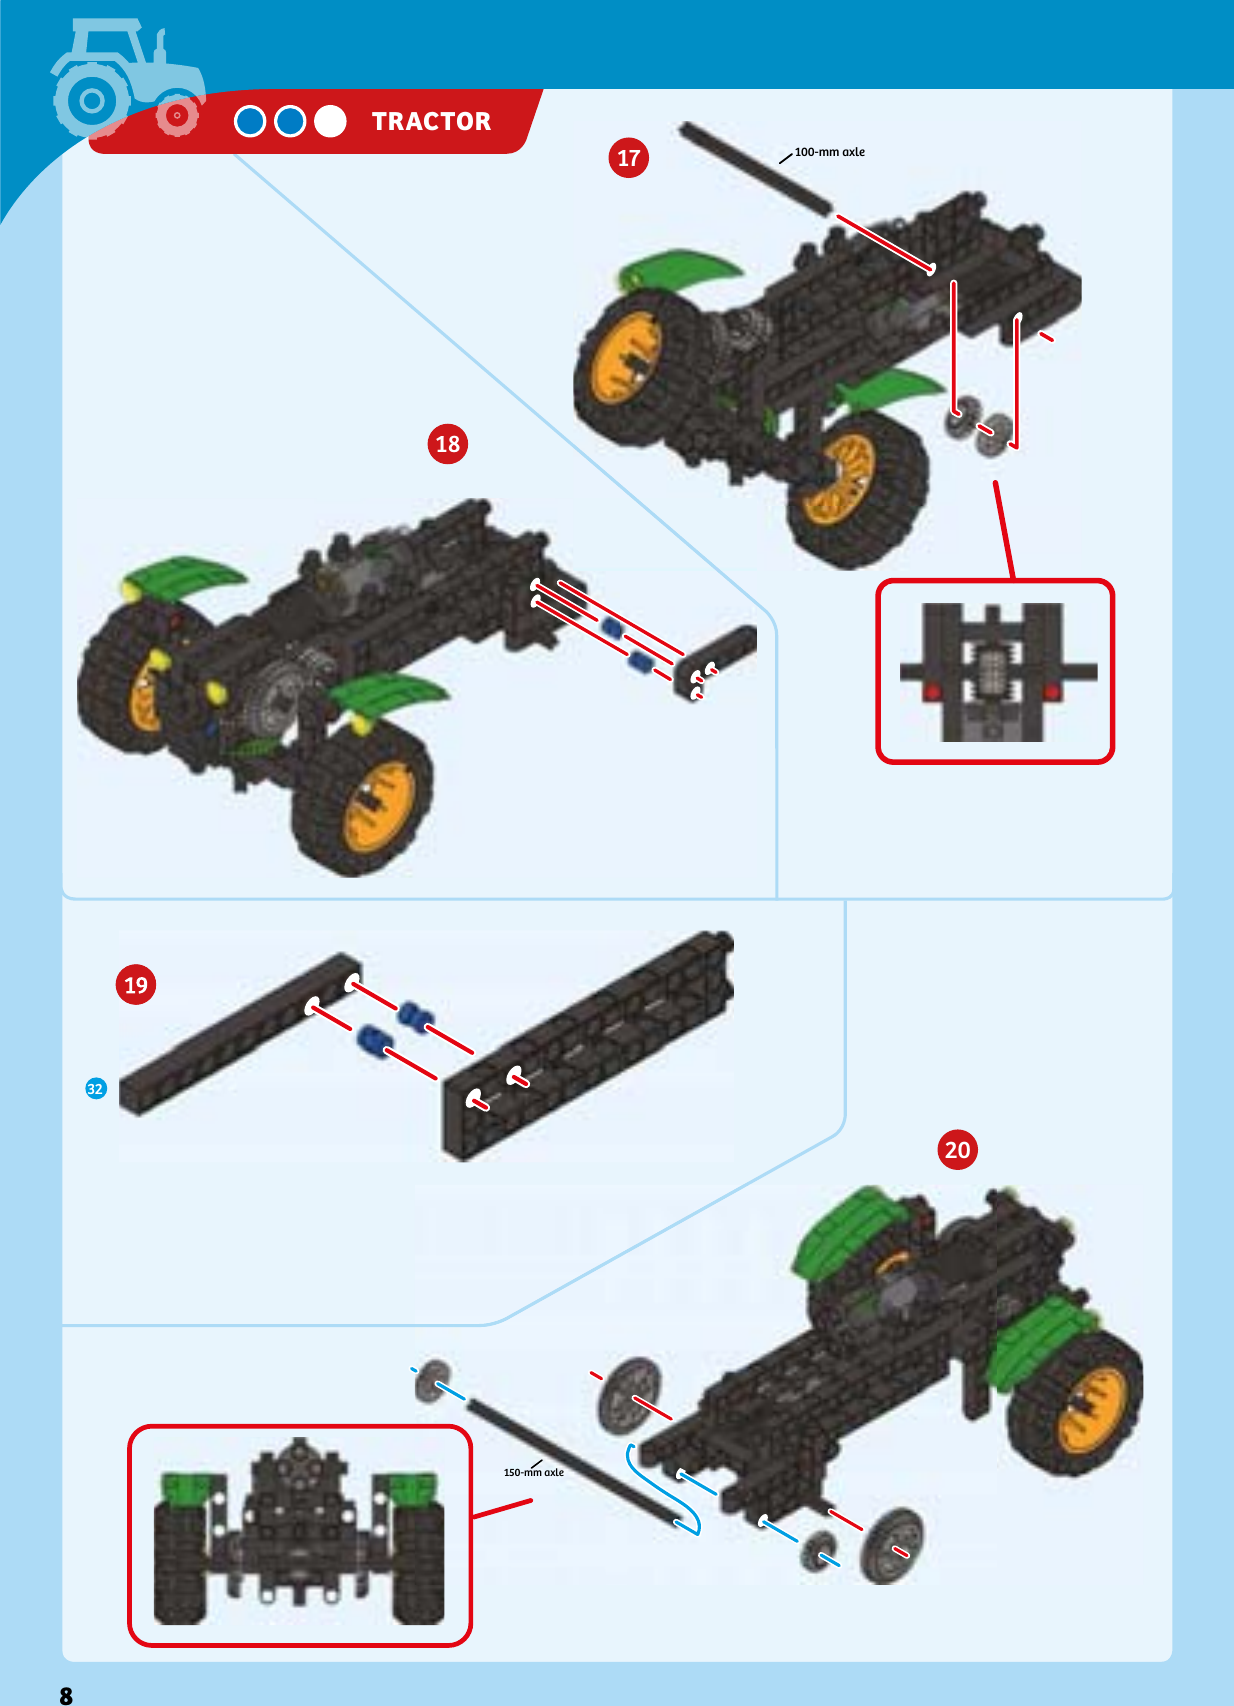 150-mm axle100-mm axle32TRACTOR